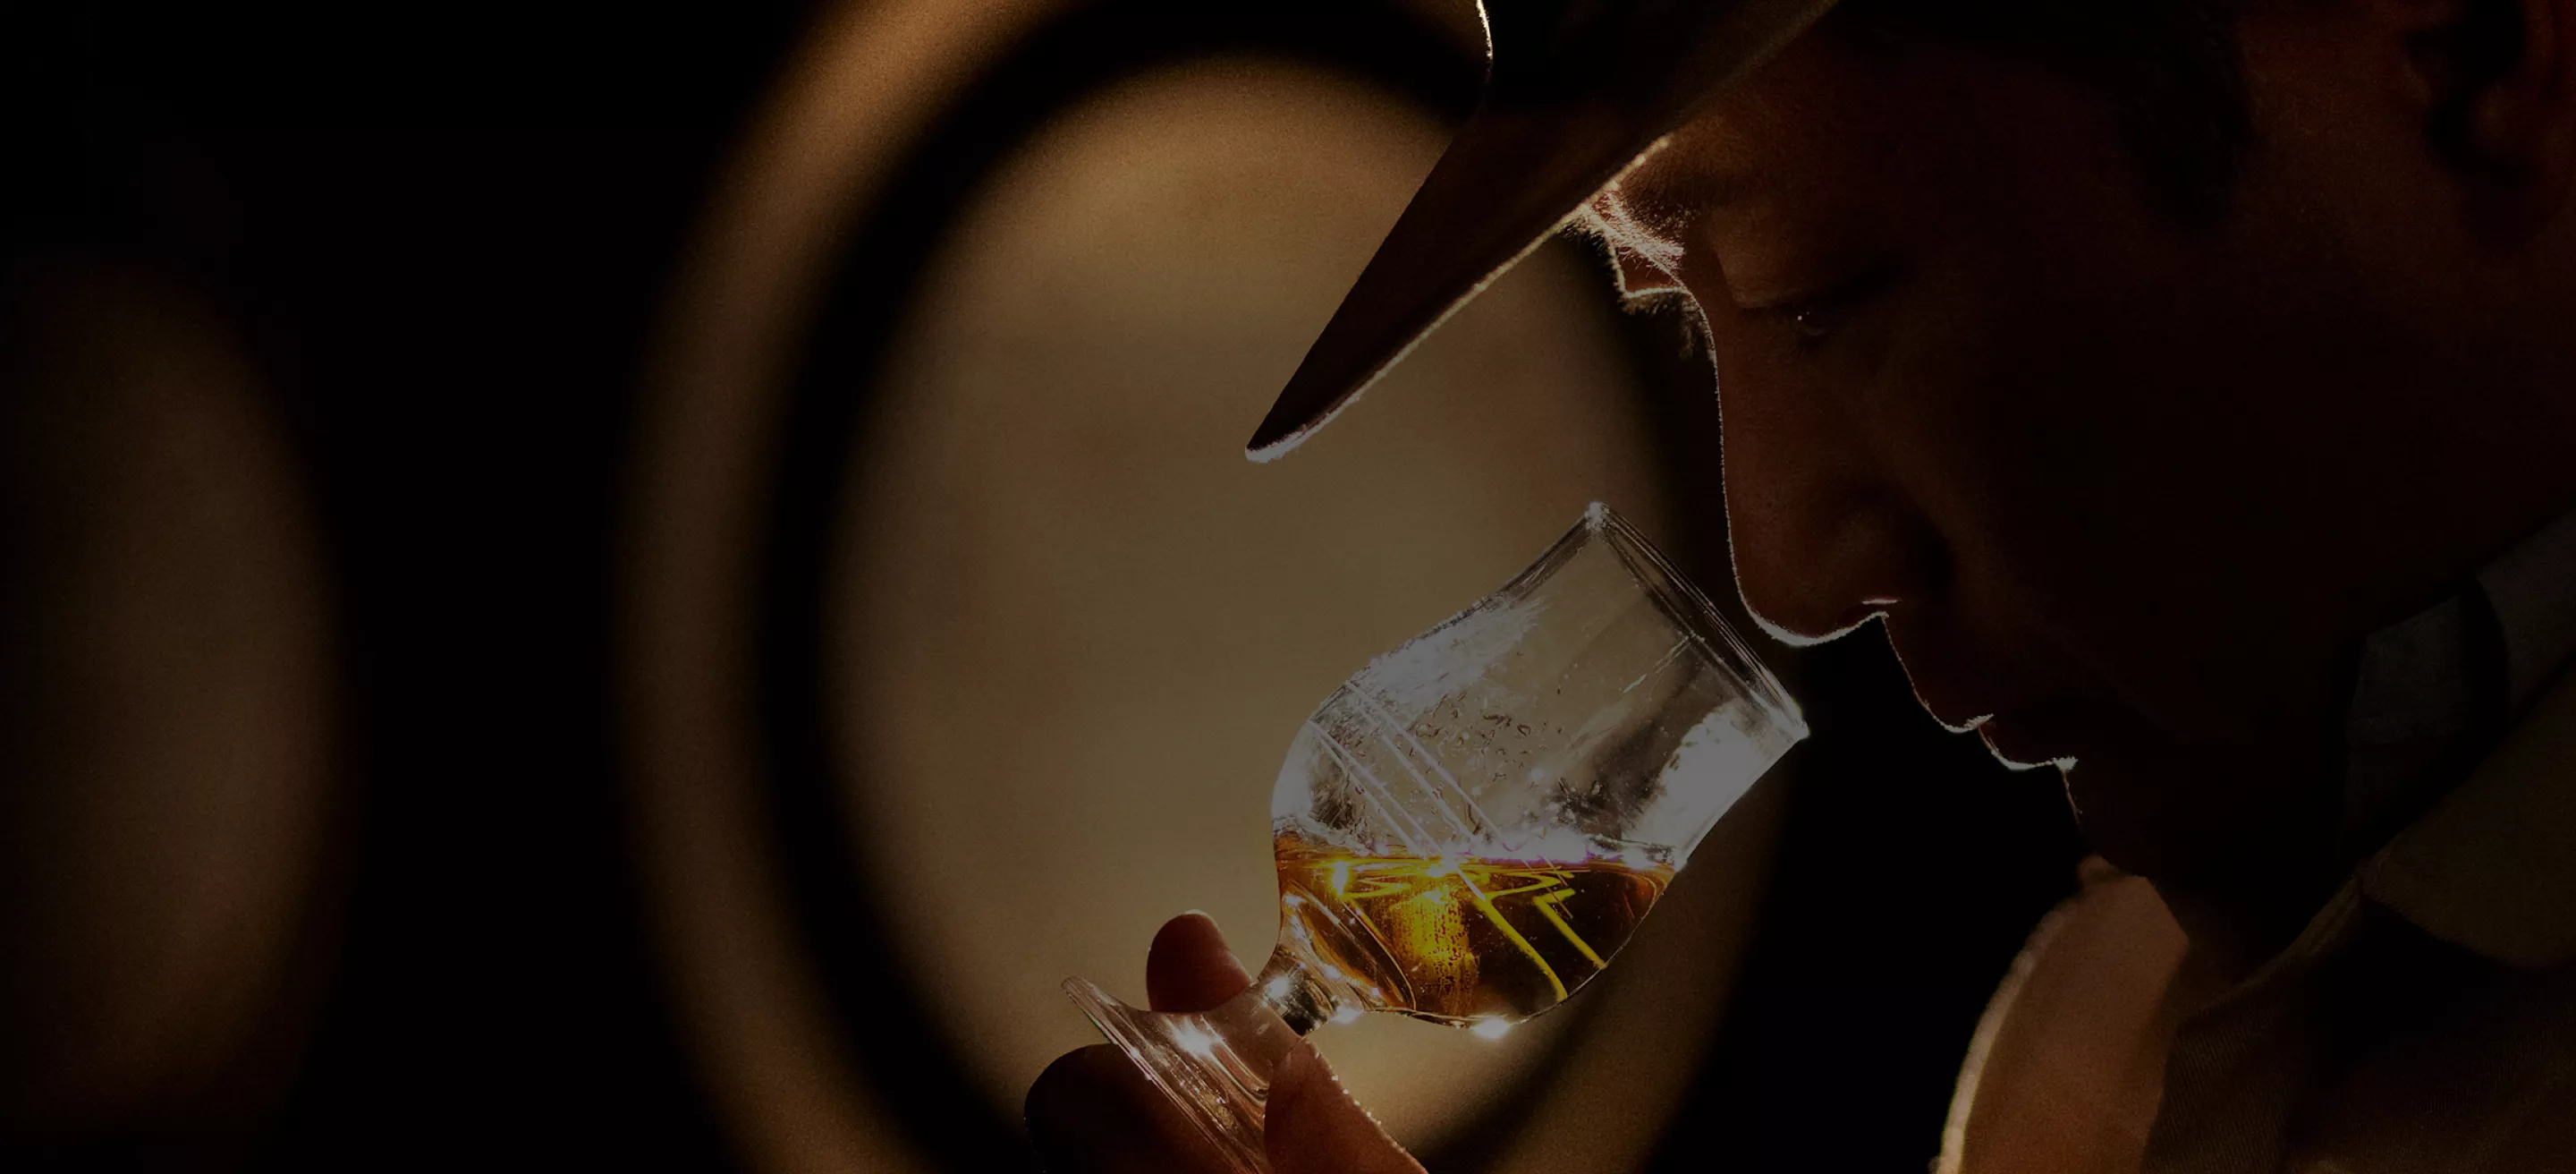 Homepage hero, man smelling glass of whisky 